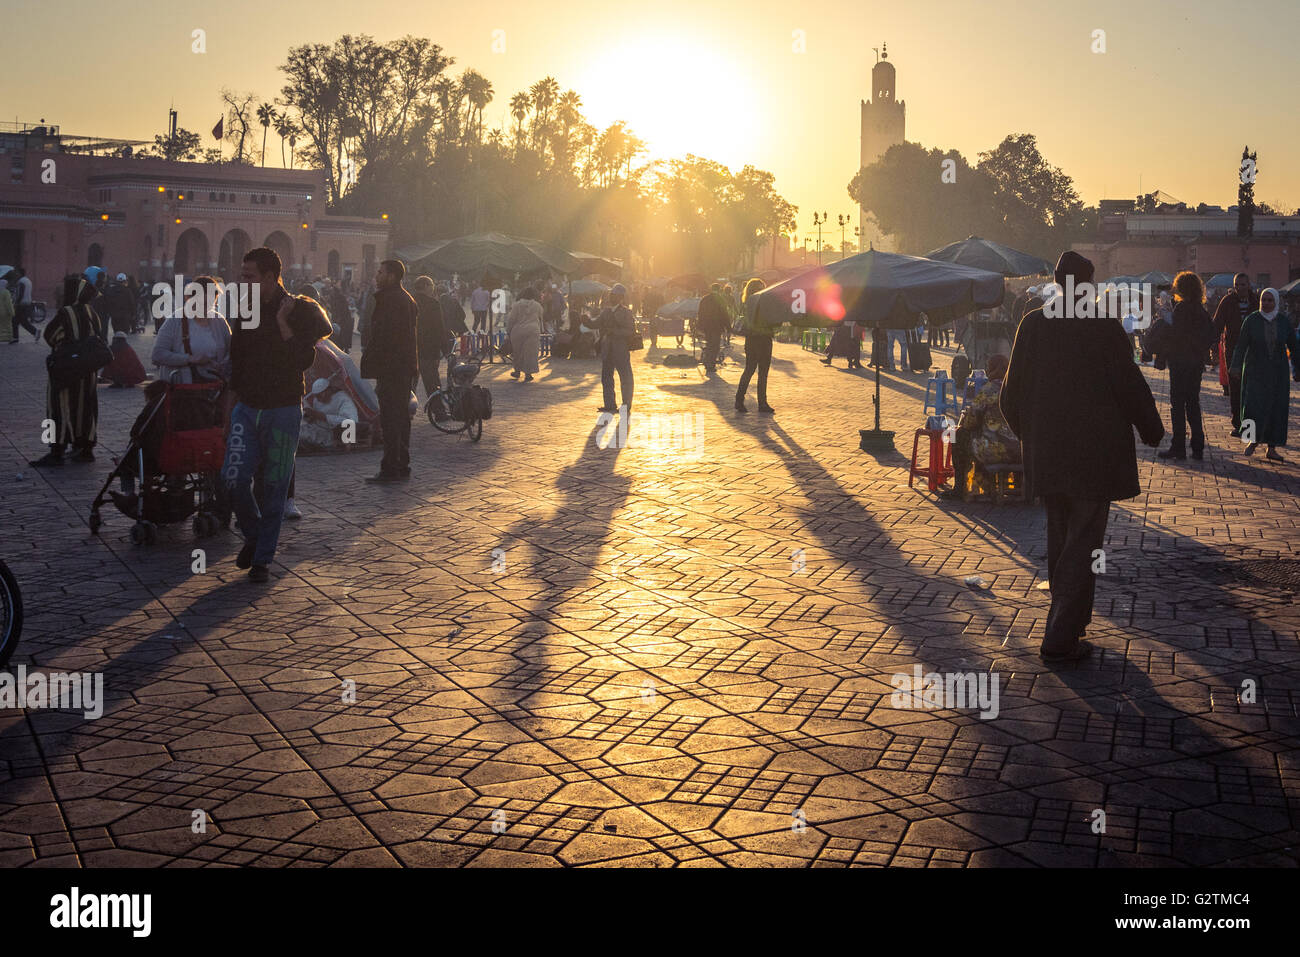 Sunset silhouettes in Marrakech, jemaa el fna square, Morocco Stock Photo